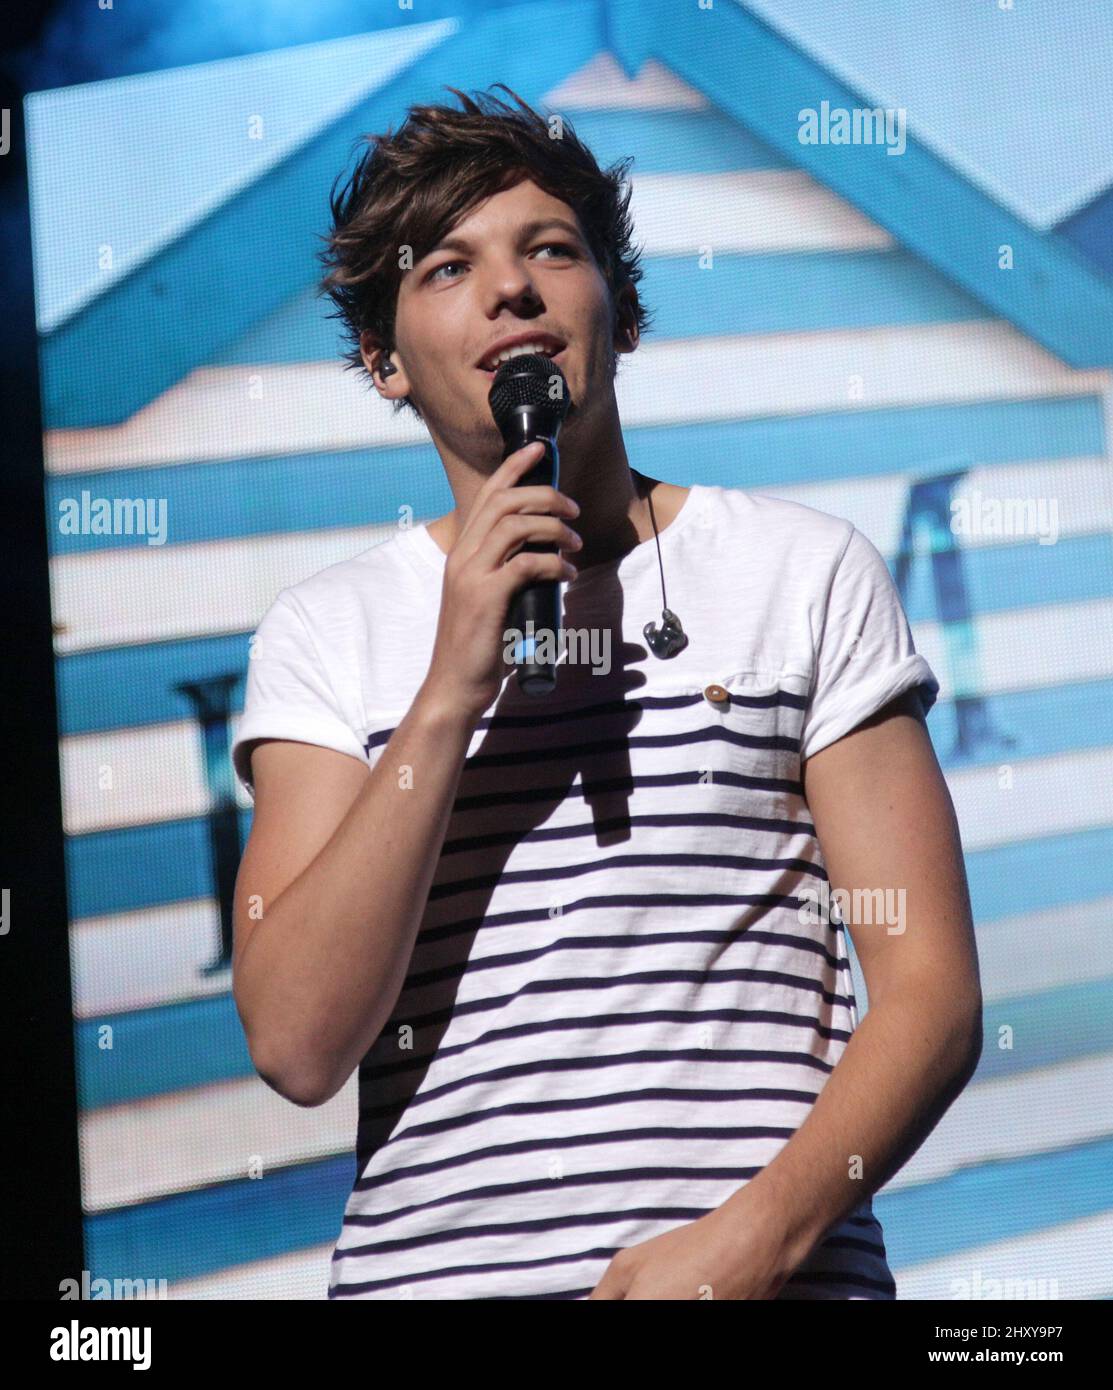 Mar. 06, 2012 - Durham, North Carolina; USA - Singer LOUIS TOMLINSON of the  band One Direction performs live as their 2012 tour makes a stop at the  Durham Performing Arts Center.